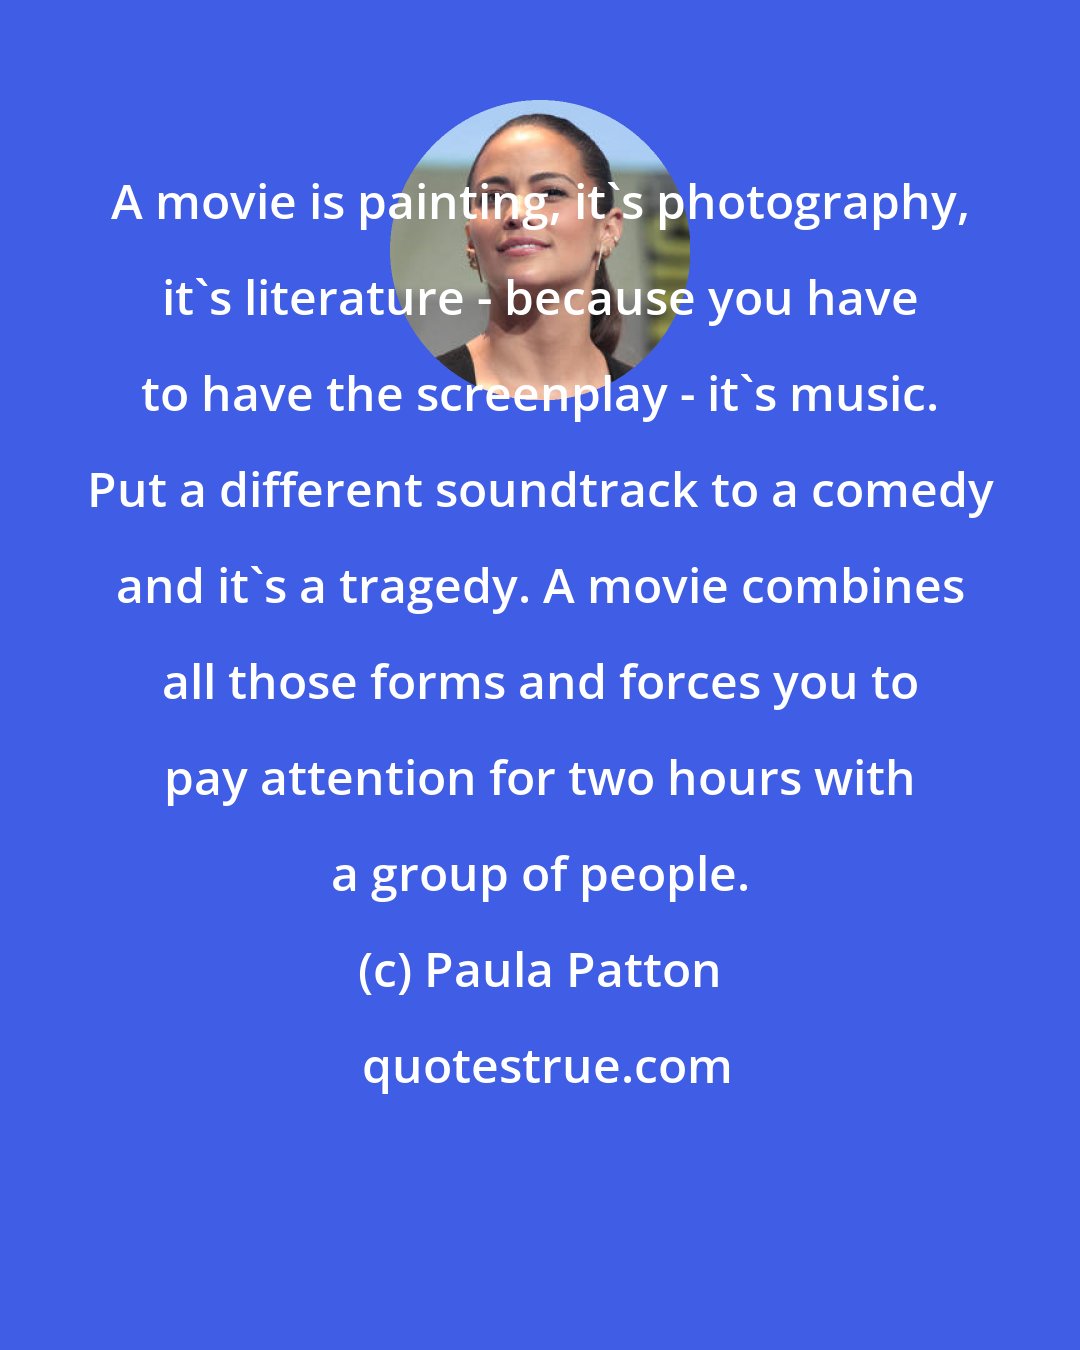 Paula Patton: A movie is painting, it's photography, it's literature - because you have to have the screenplay - it's music. Put a different soundtrack to a comedy and it's a tragedy. A movie combines all those forms and forces you to pay attention for two hours with a group of people.